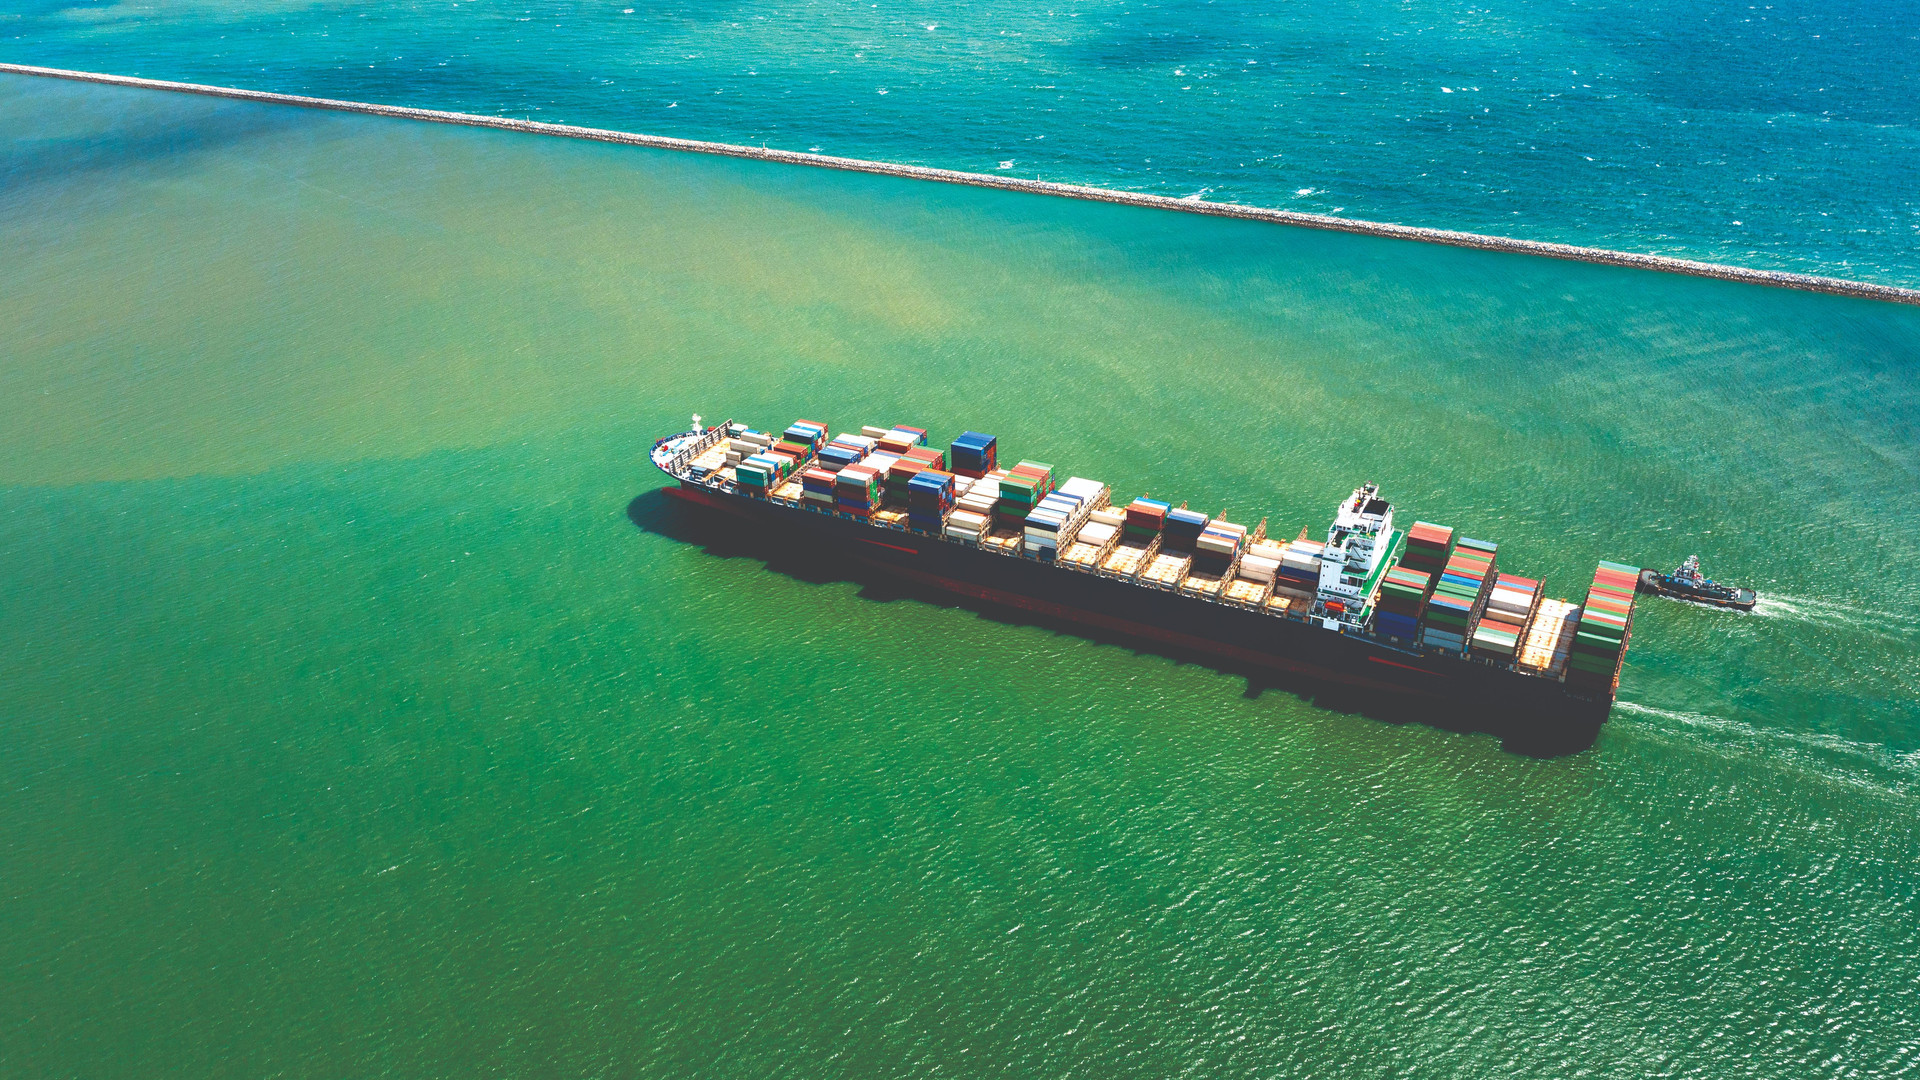 container-ship-export-import-business-services-logistics-shipping-cargo-harbor-transport-international-aerial-view-compressed.jpg